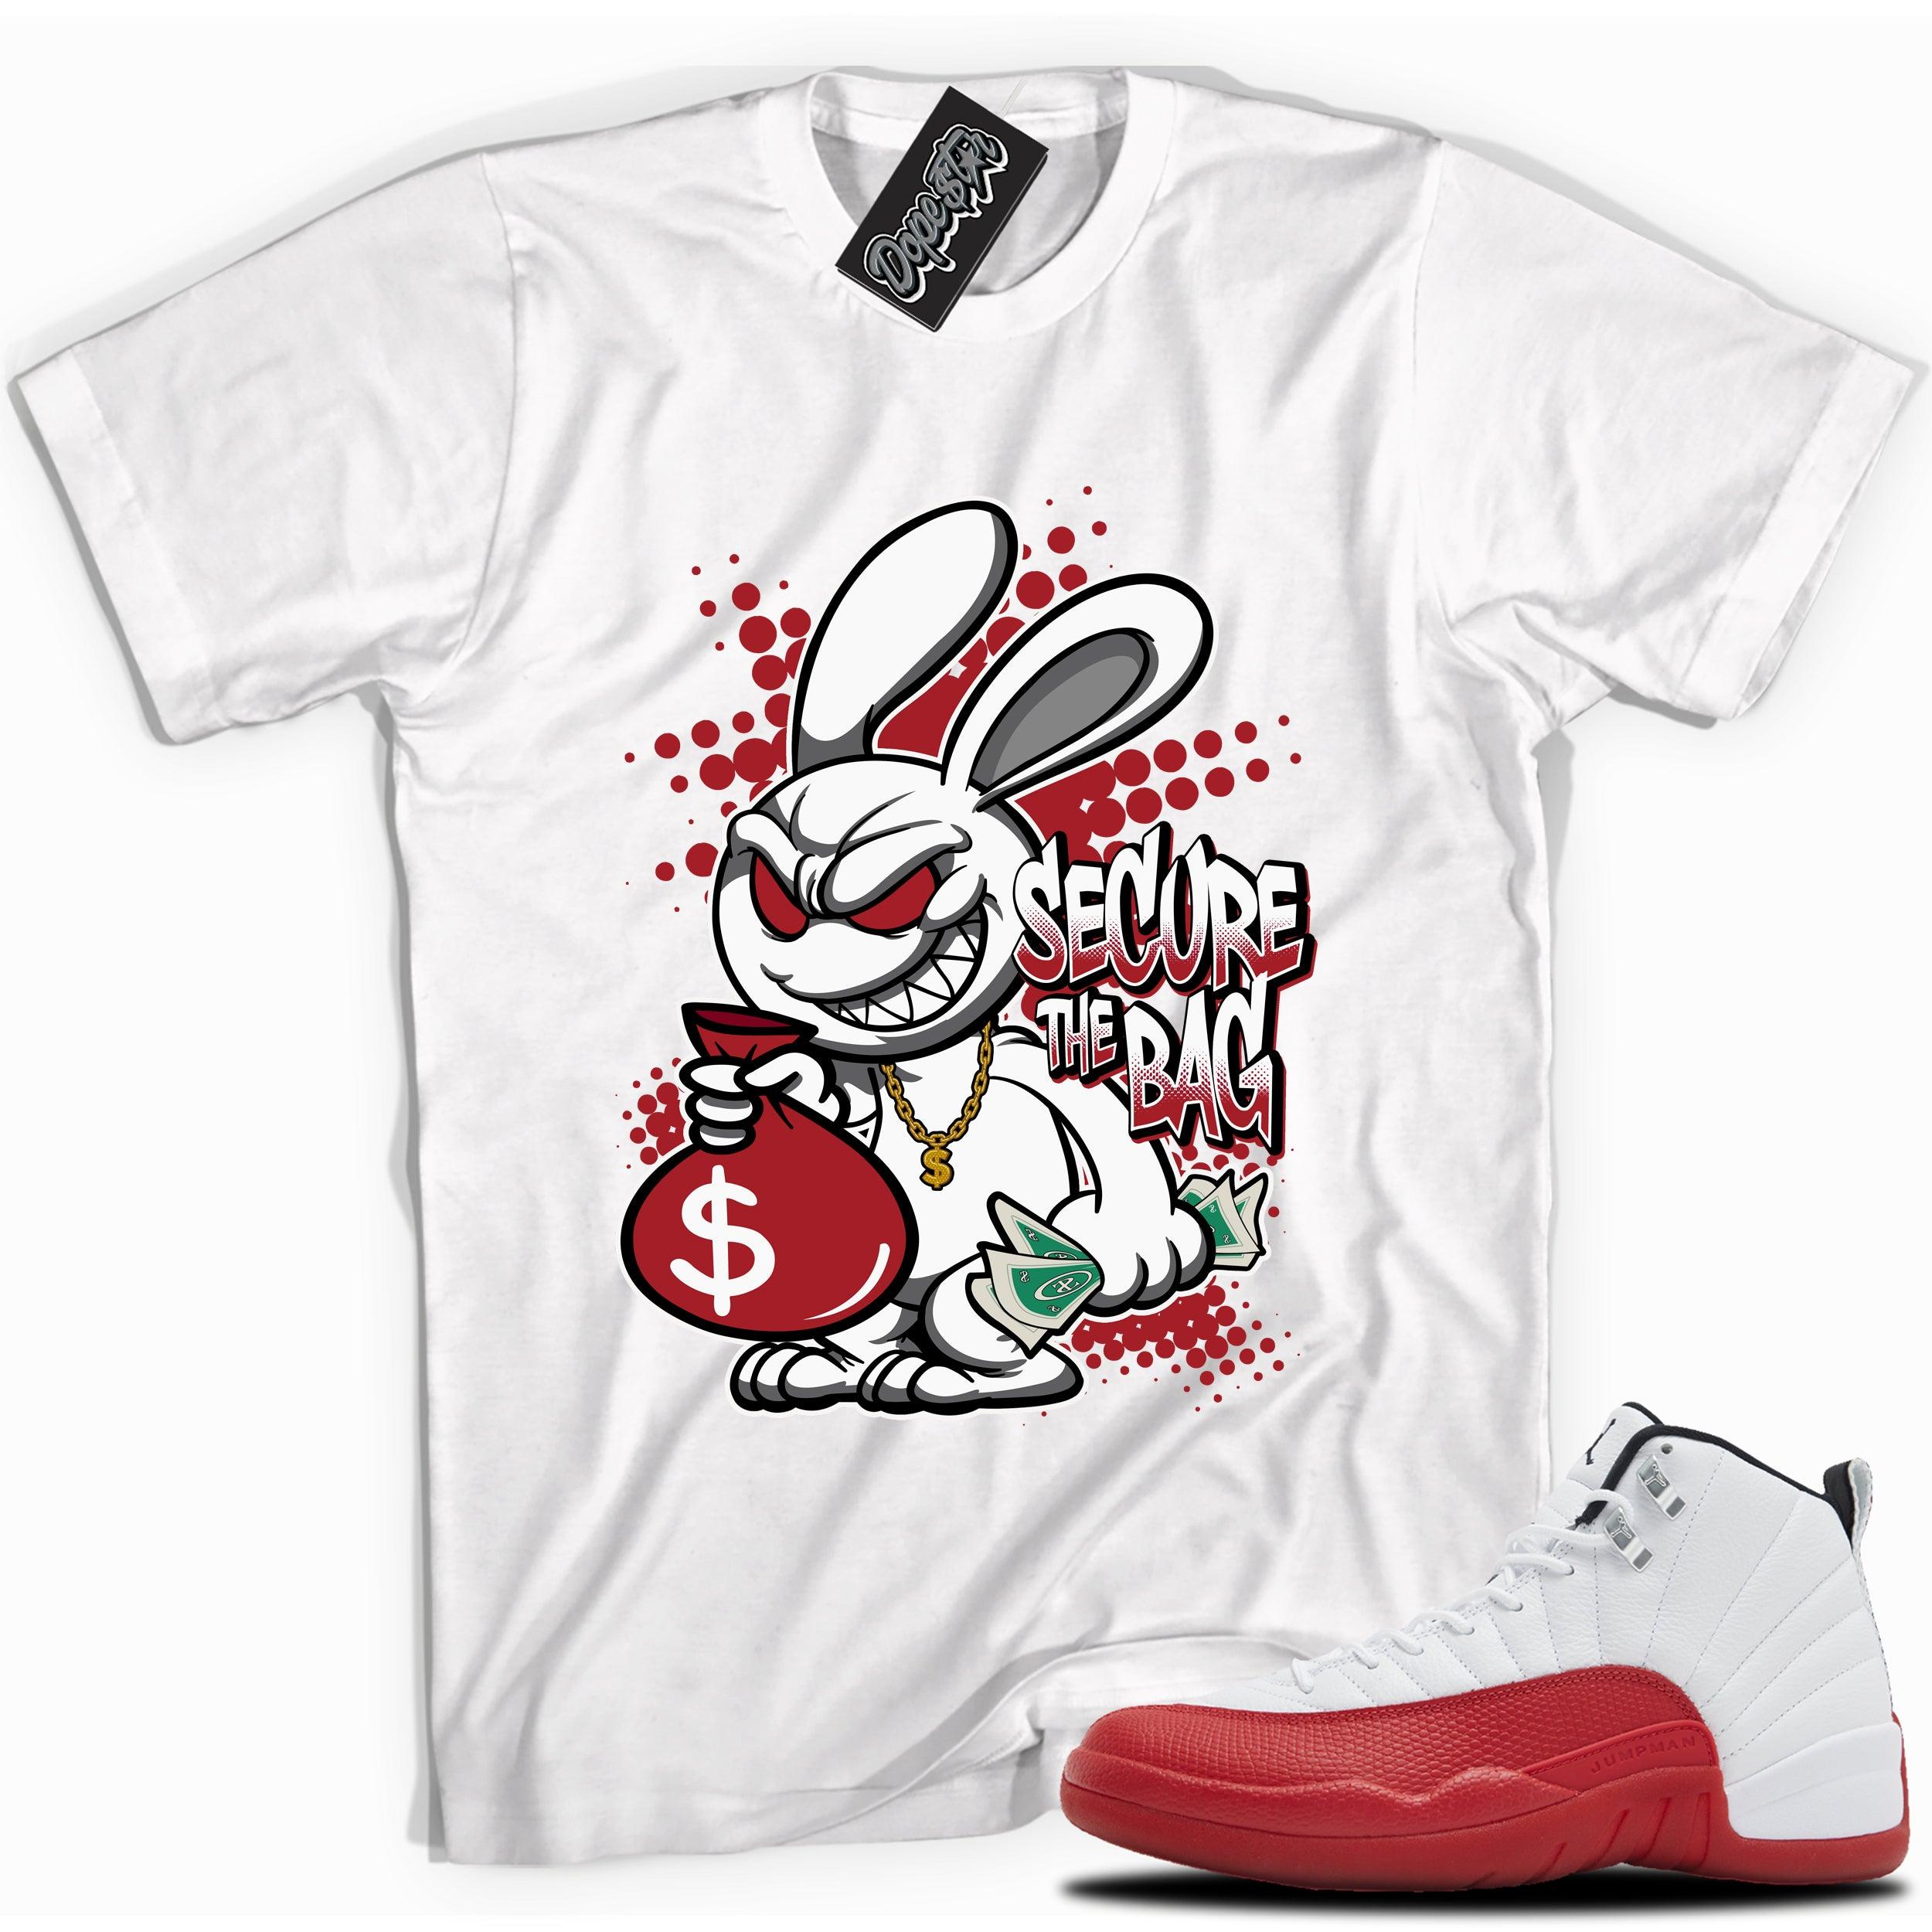 Cool White graphic tee with “SECURE THE BAG” print, that perfectly matches Air Jordan 12 Retro Cherry Red 2023 red and white sneakers